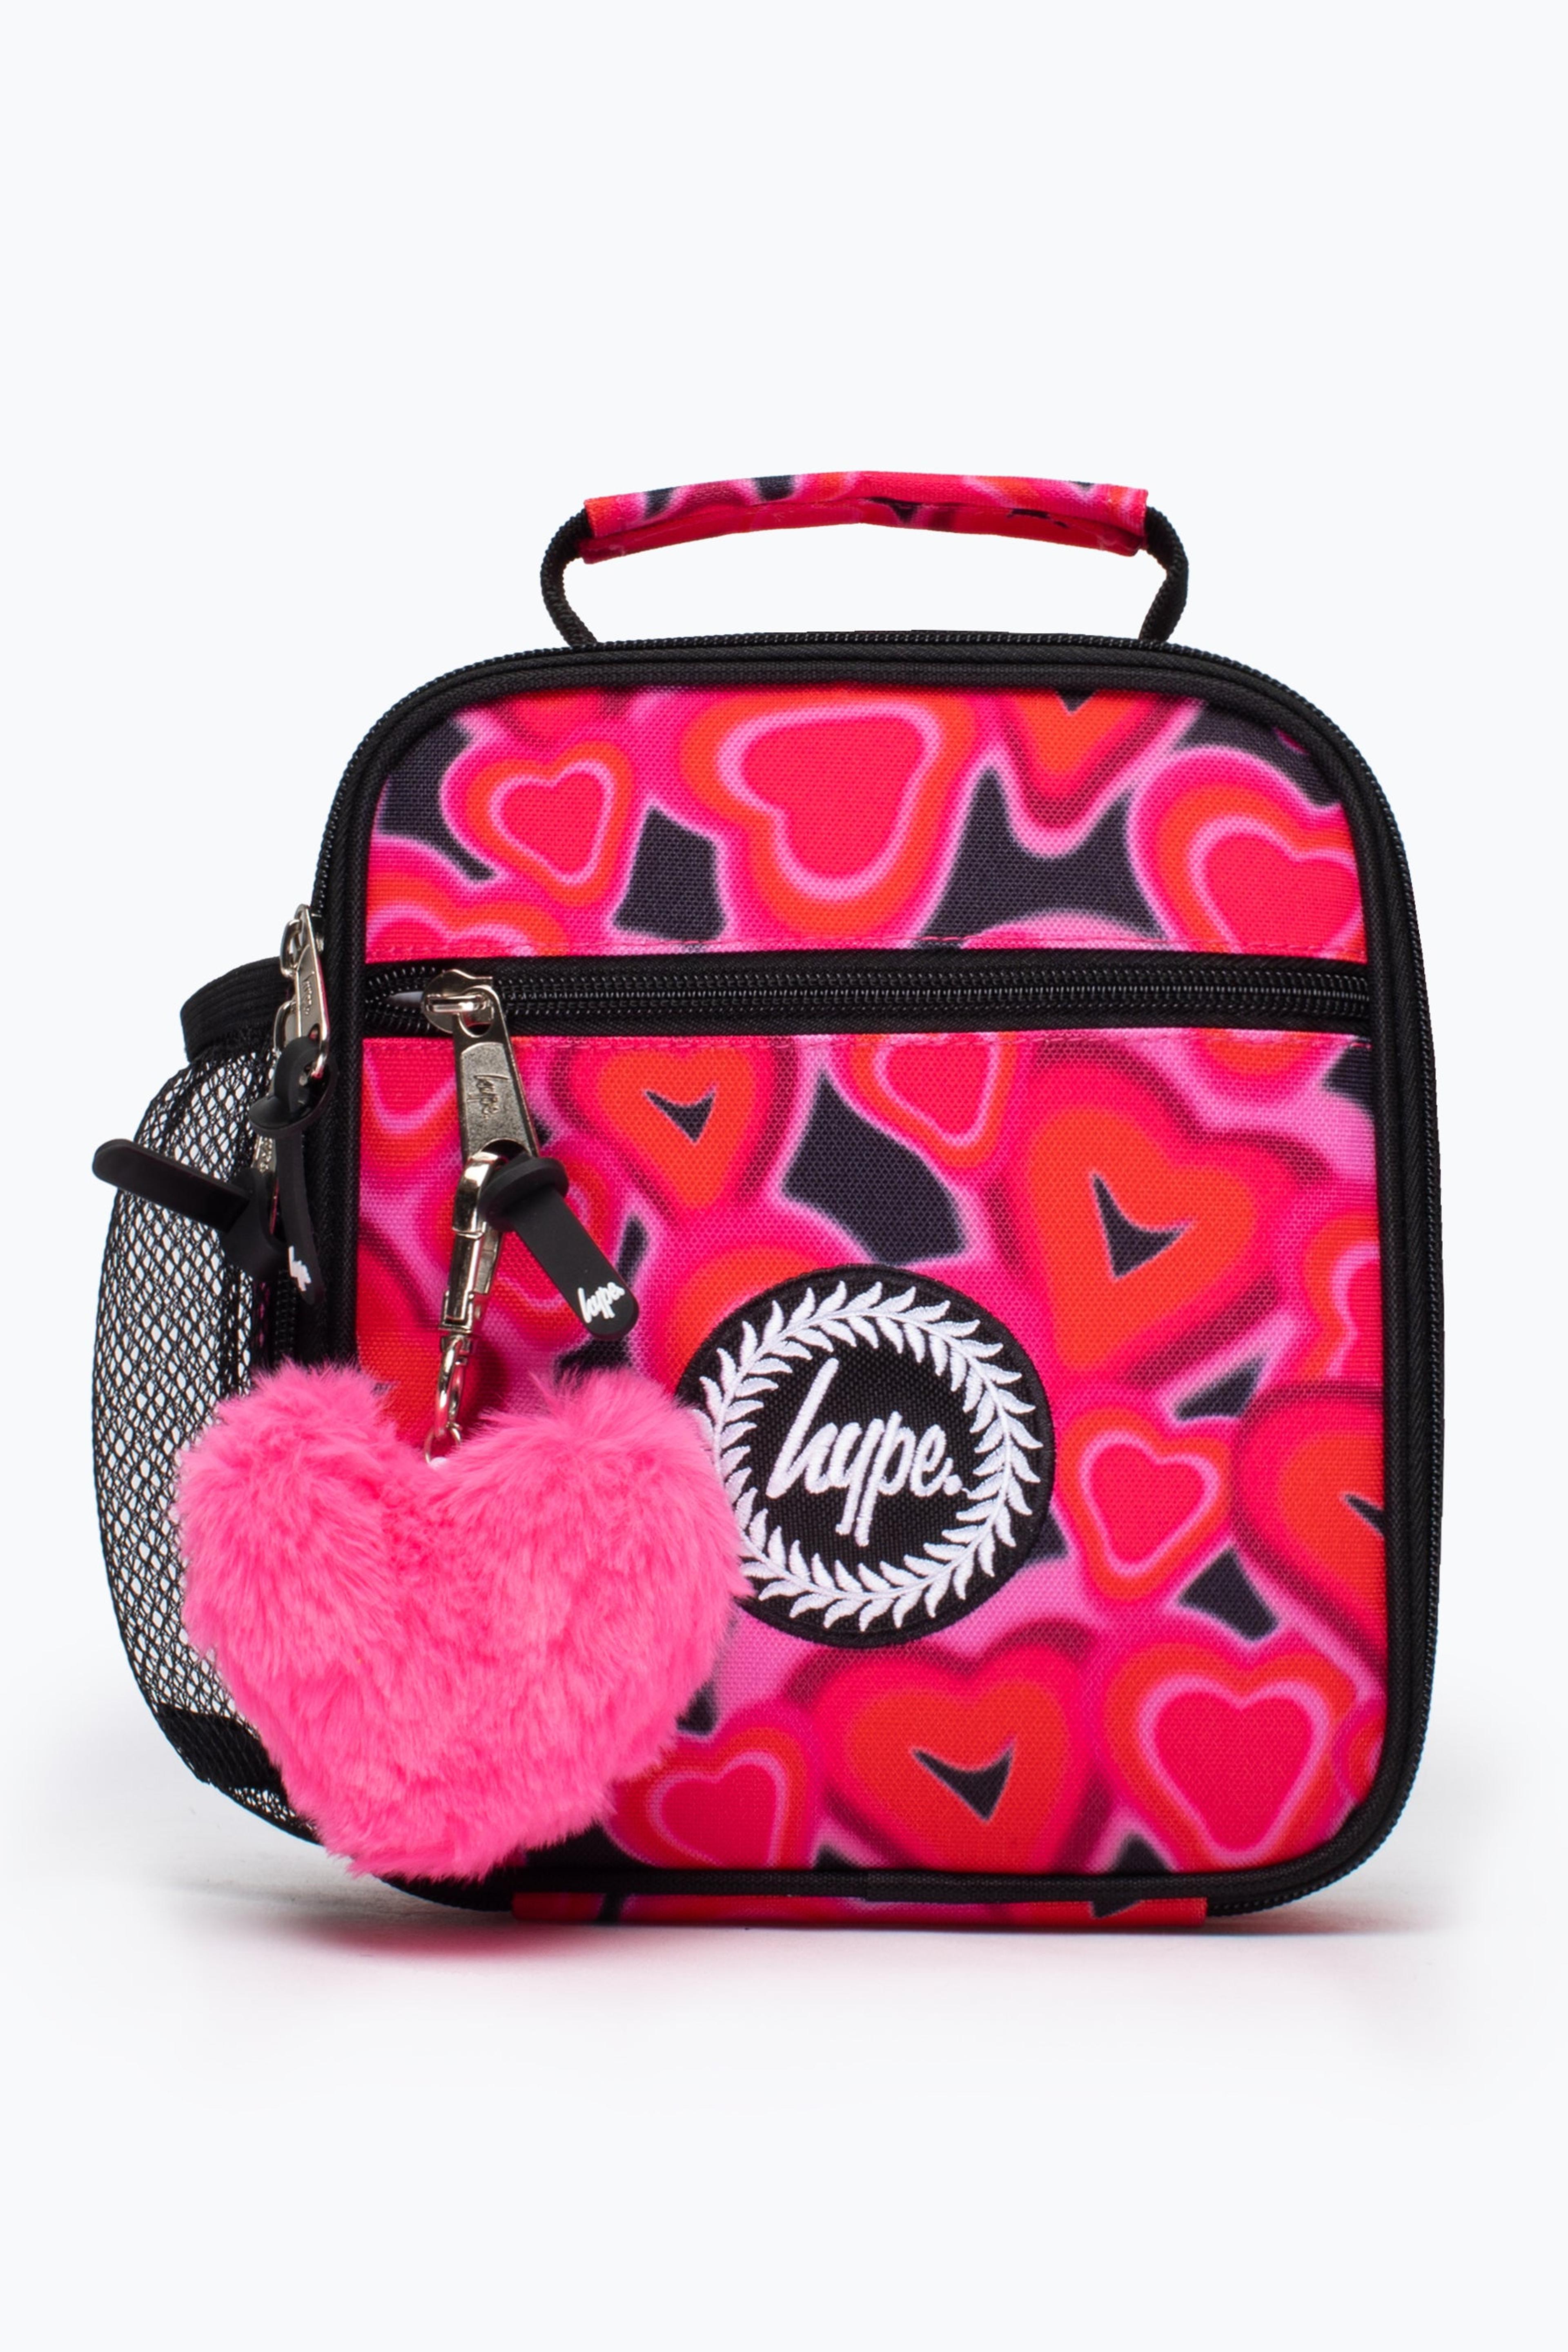 HYPE KIDS UNISEX PINK SPRAY HEARTS LUNCH BOX